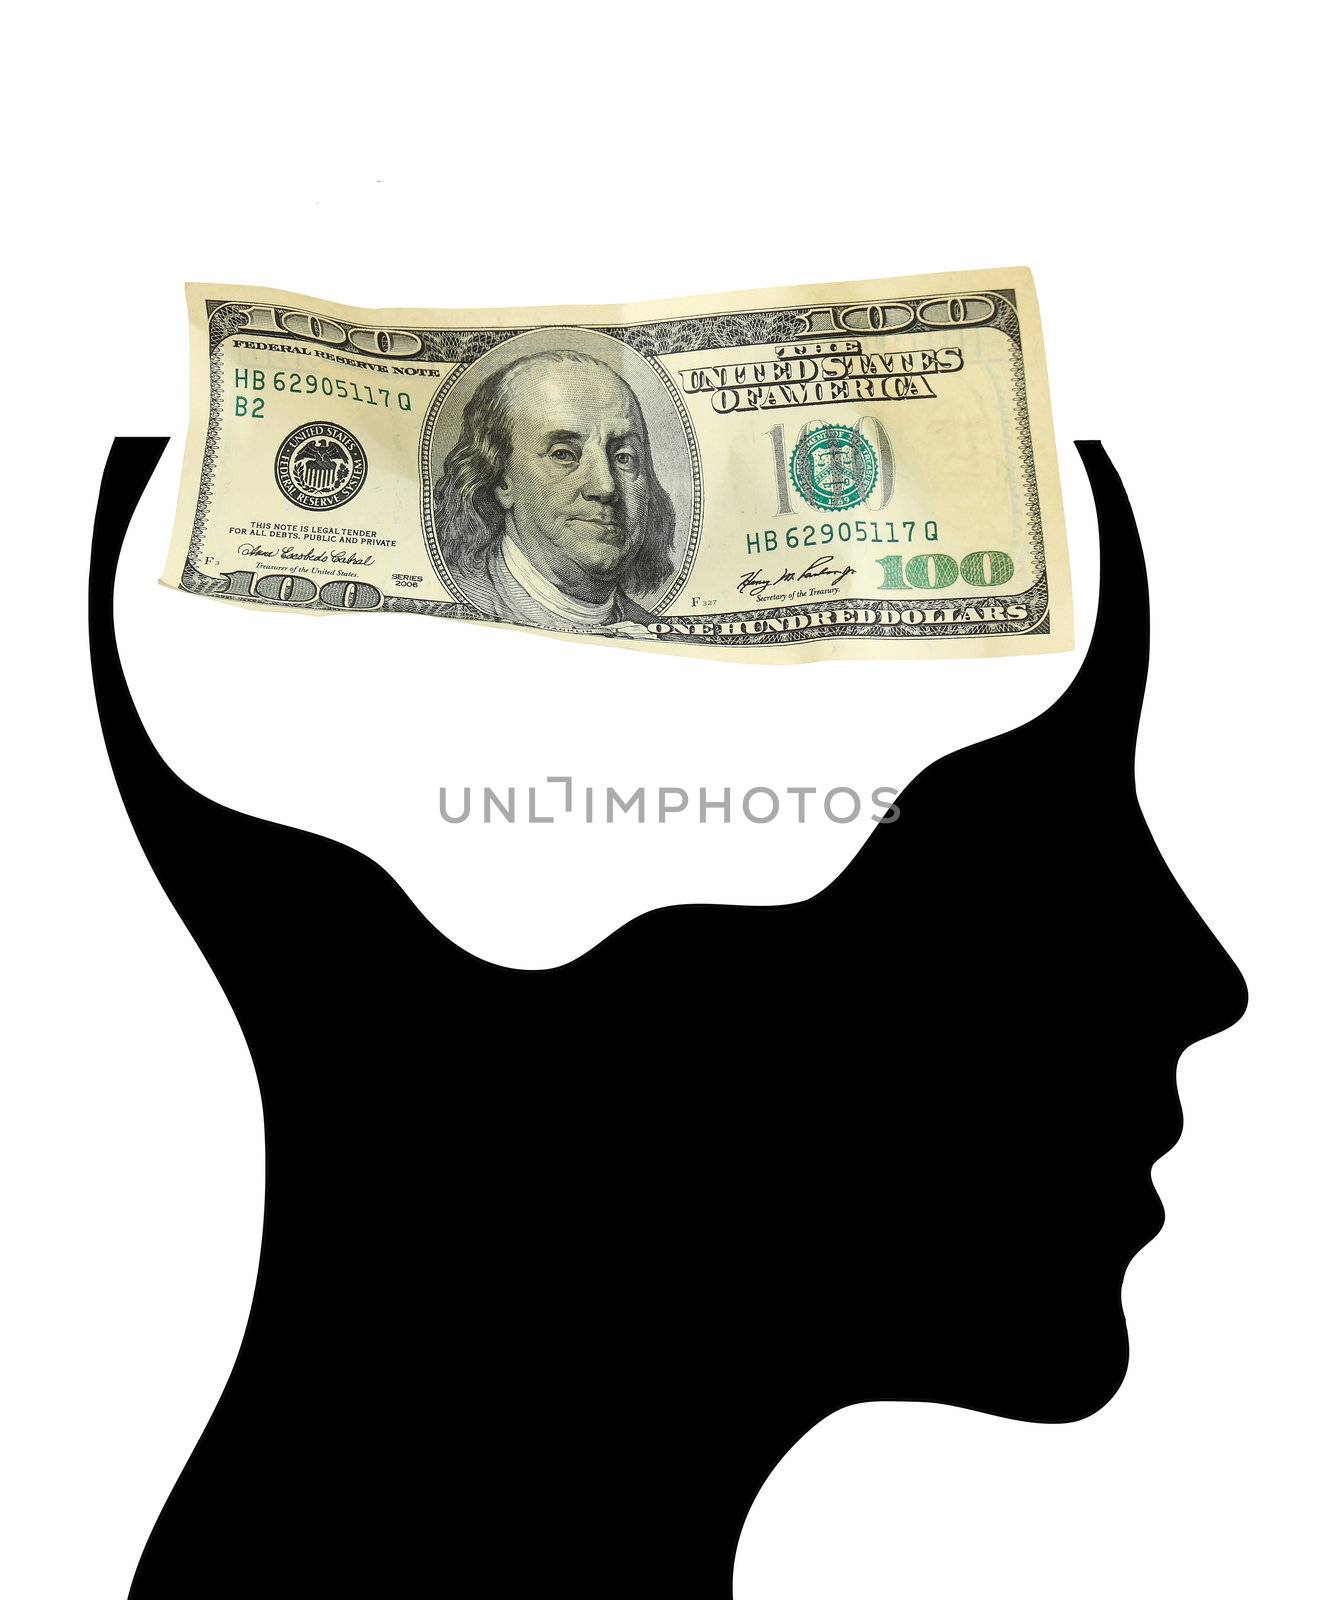 Dollars to control the human brain by rufous